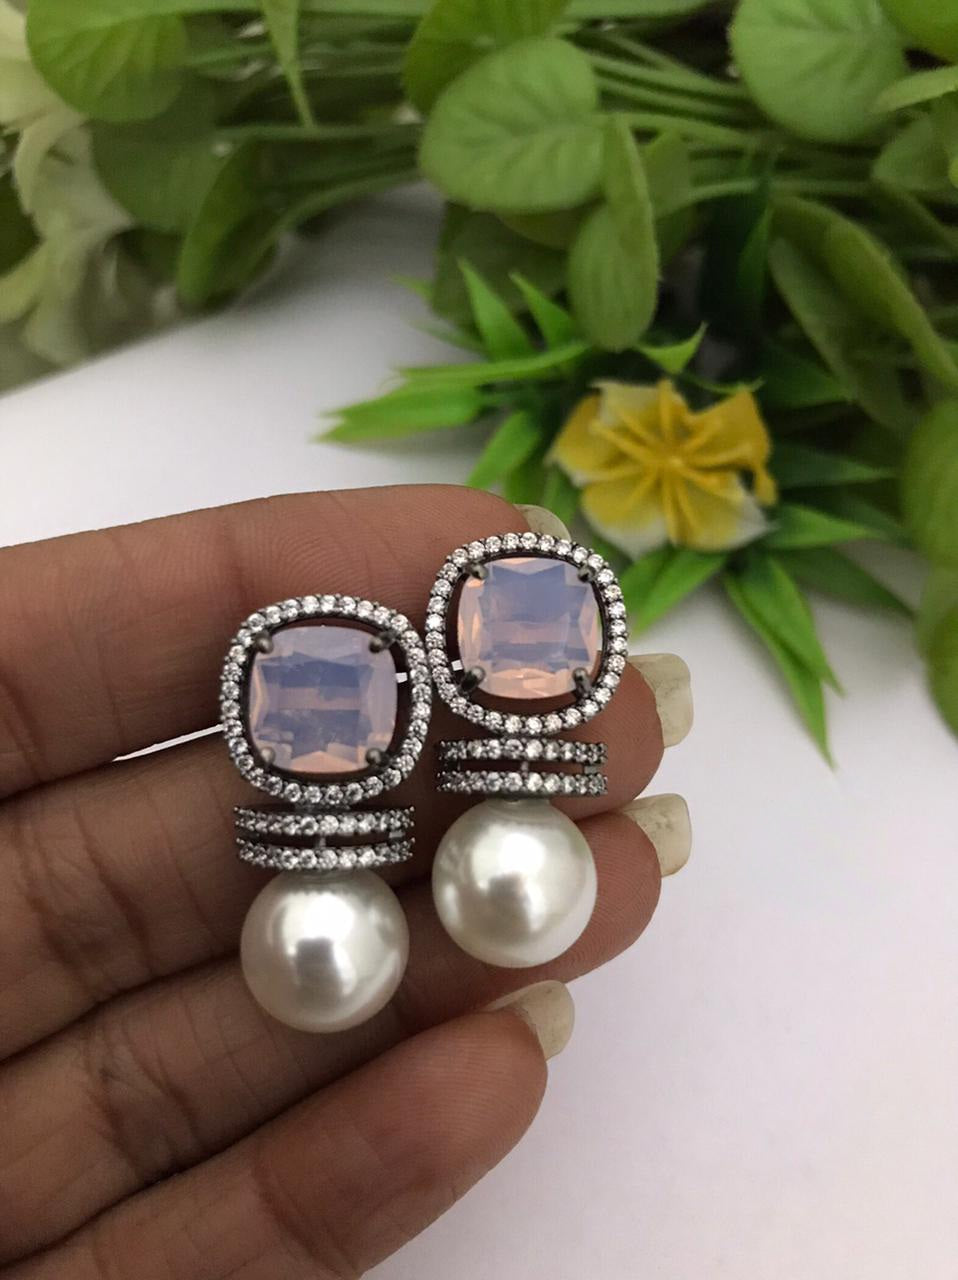 Silver Pearl Wedding stud Earrings with CZ Light Pink stones, Pearl Bridal stud Earrings, Crystal Wedding bridal statement Earrings,Available in silver Black polish also